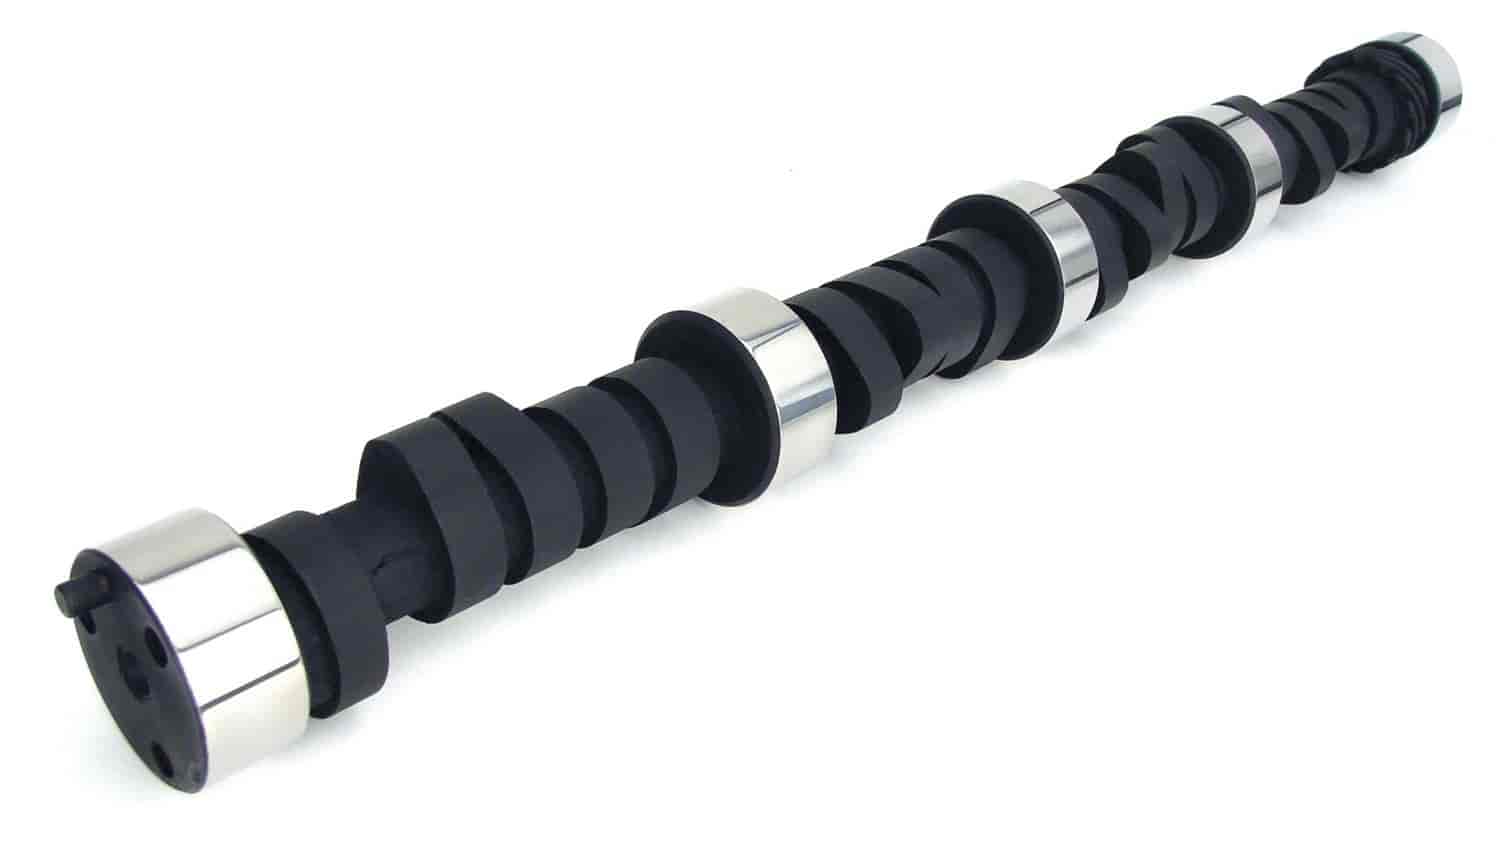 Thumpr Hydraulic Flat Tappet Camshaft Lift .498"/.483" Duration 279/297 RPM Range 1800 to 5600